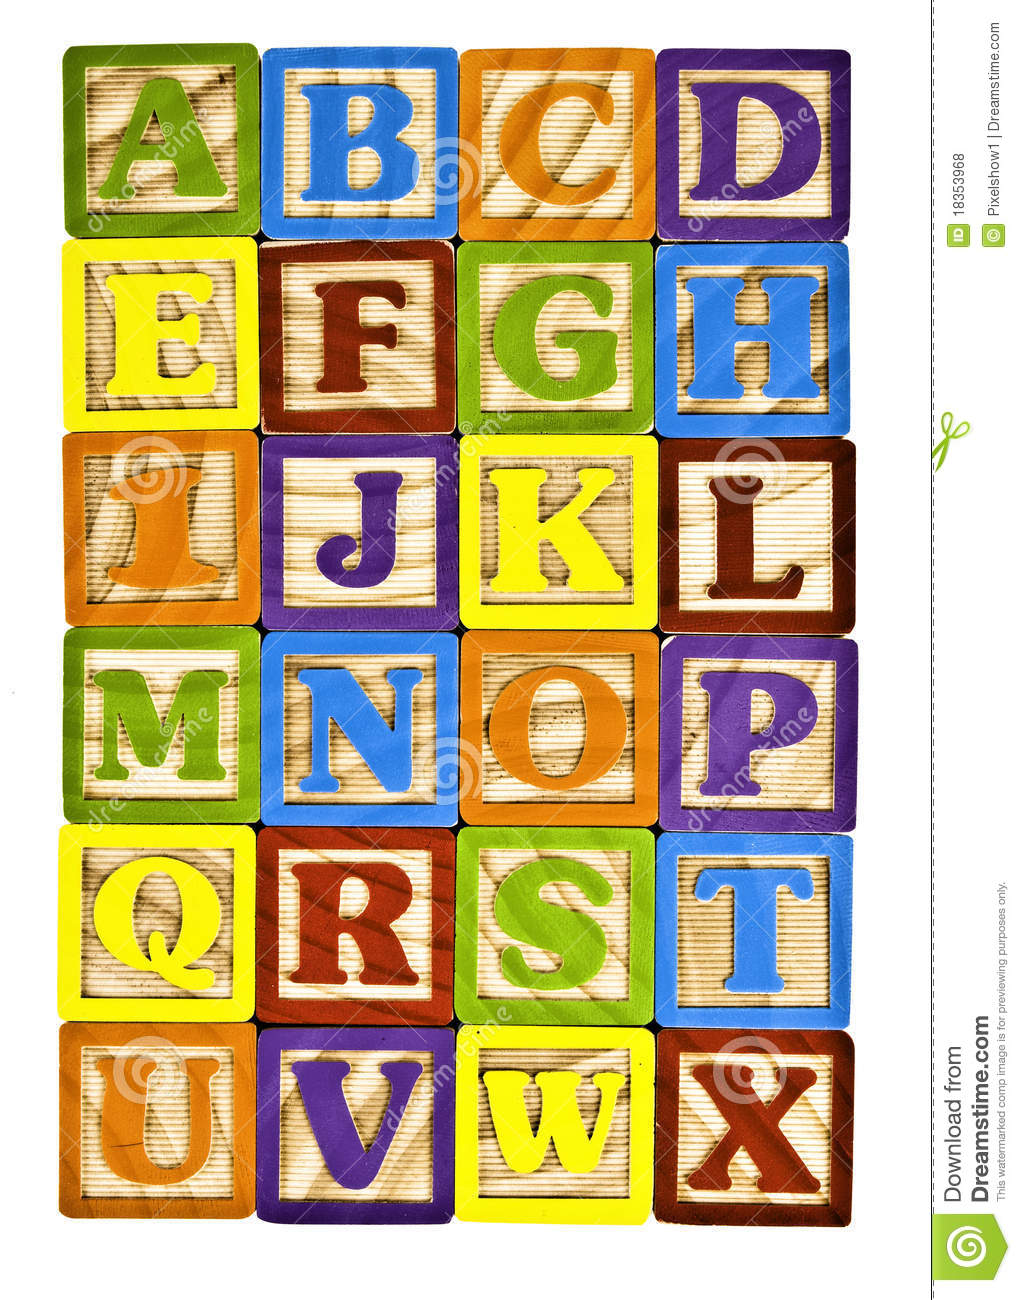 Alphabet In Block Letters Royalty Free Stock Photos   Image  18353968